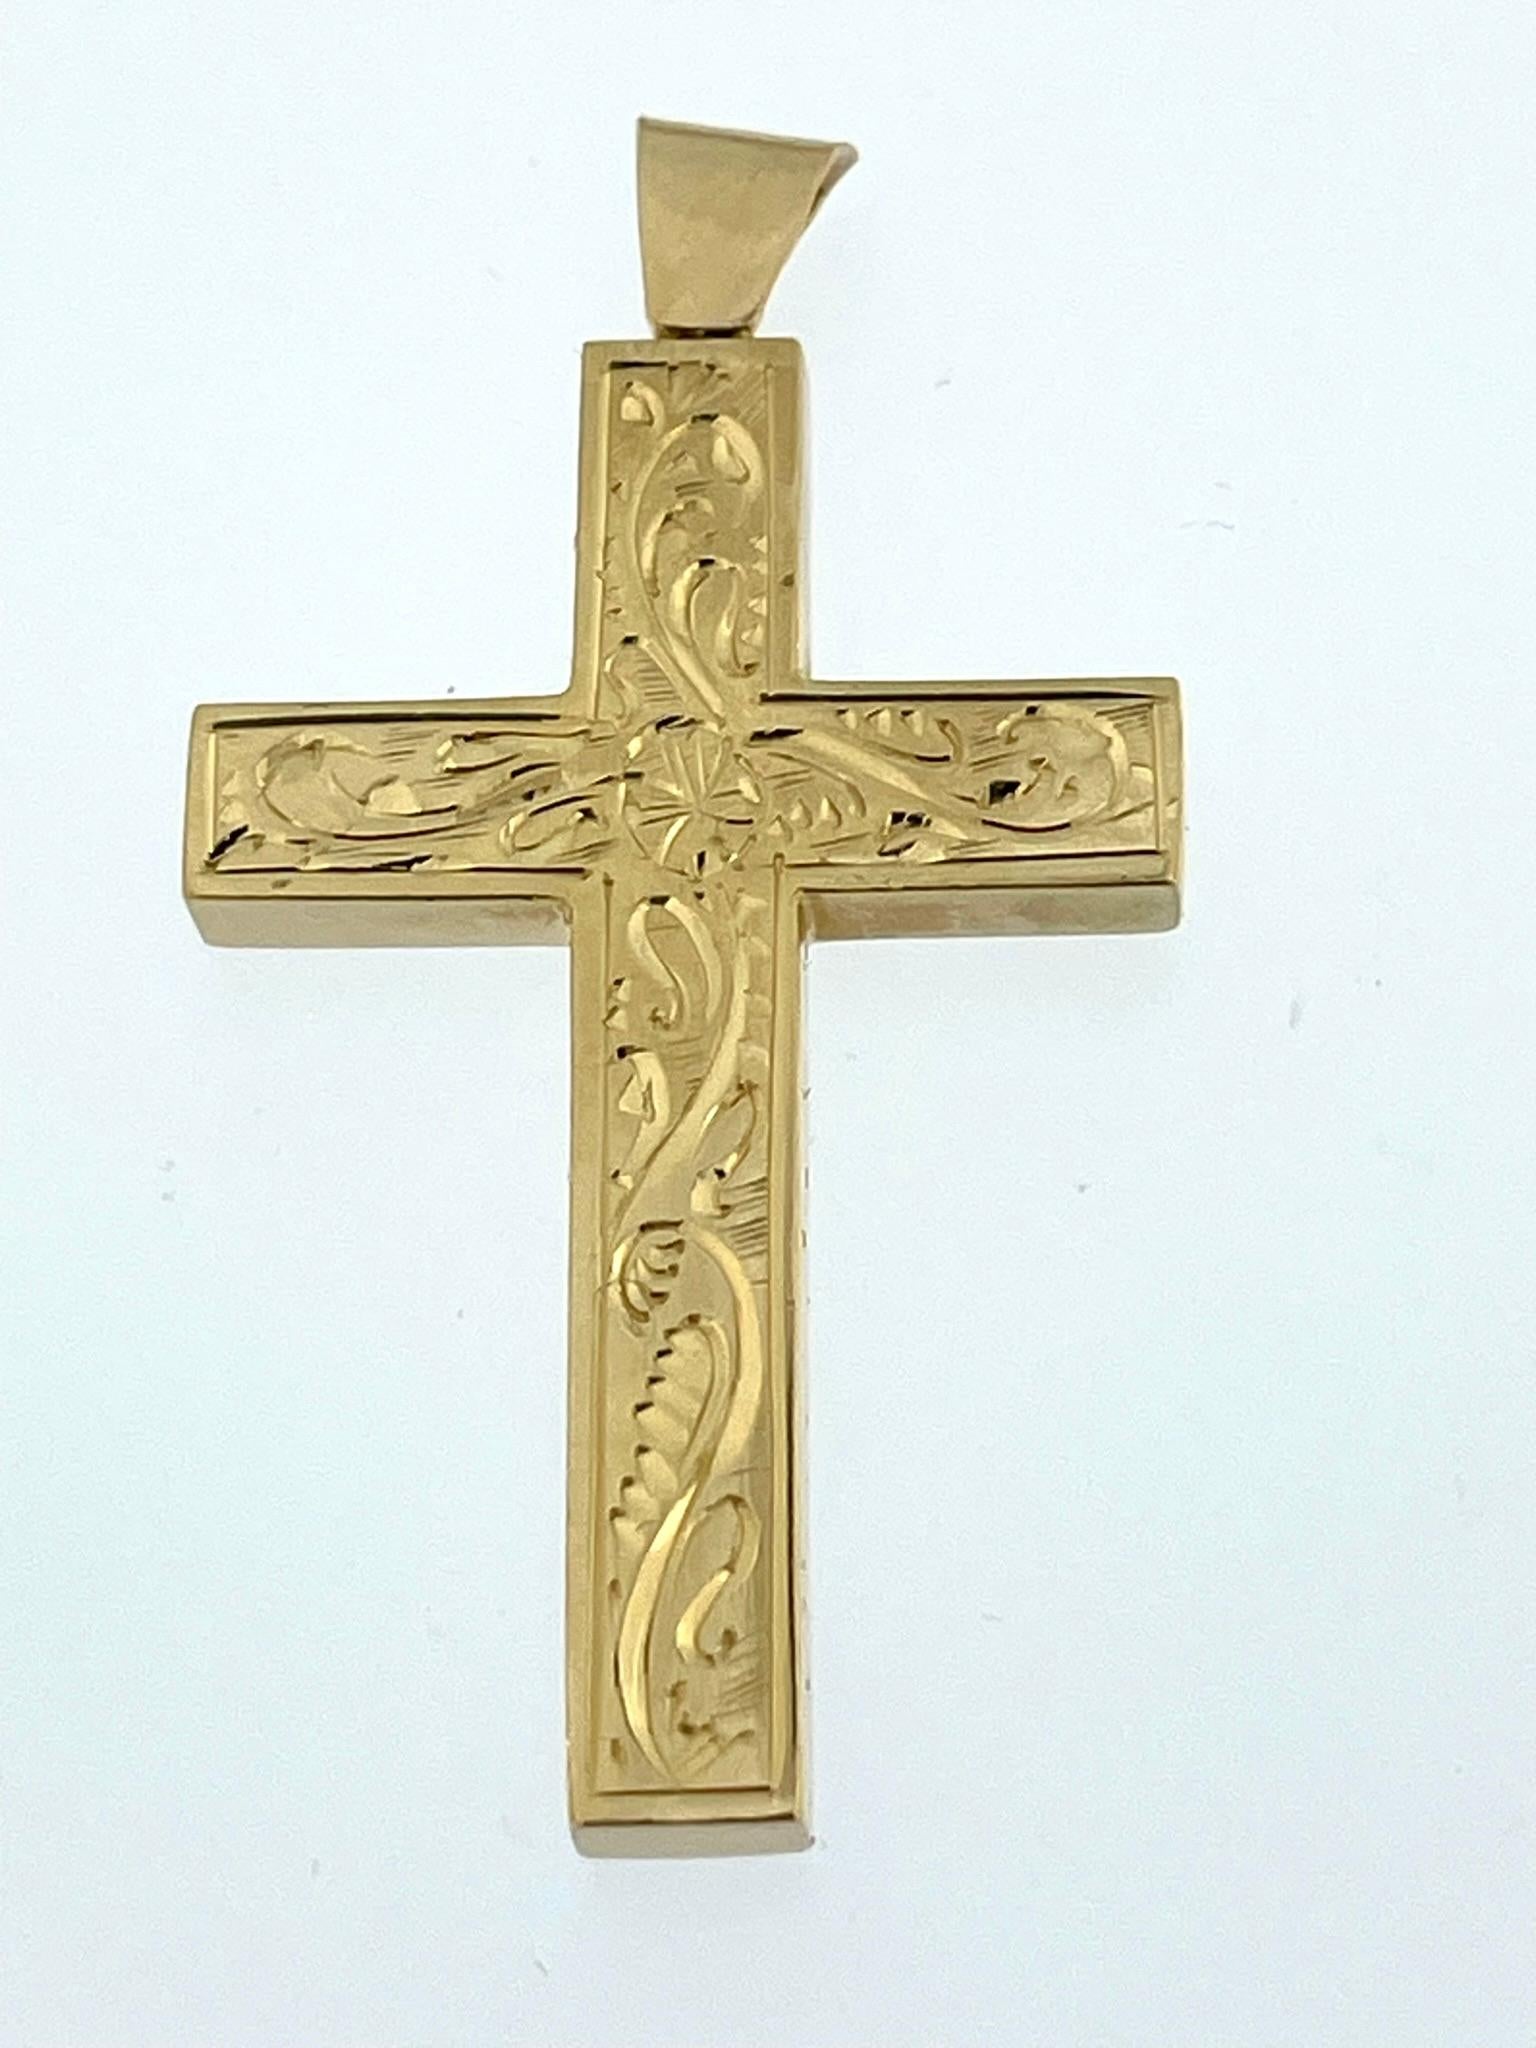 The Vintage Spanish 18kt Yellow Gold Cross with Floral Patterns is a beautifully crafted religious or decorative item with several distinctive features.

This cross is made from 18-karat yellow gold, a high-quality and luxurious material known for